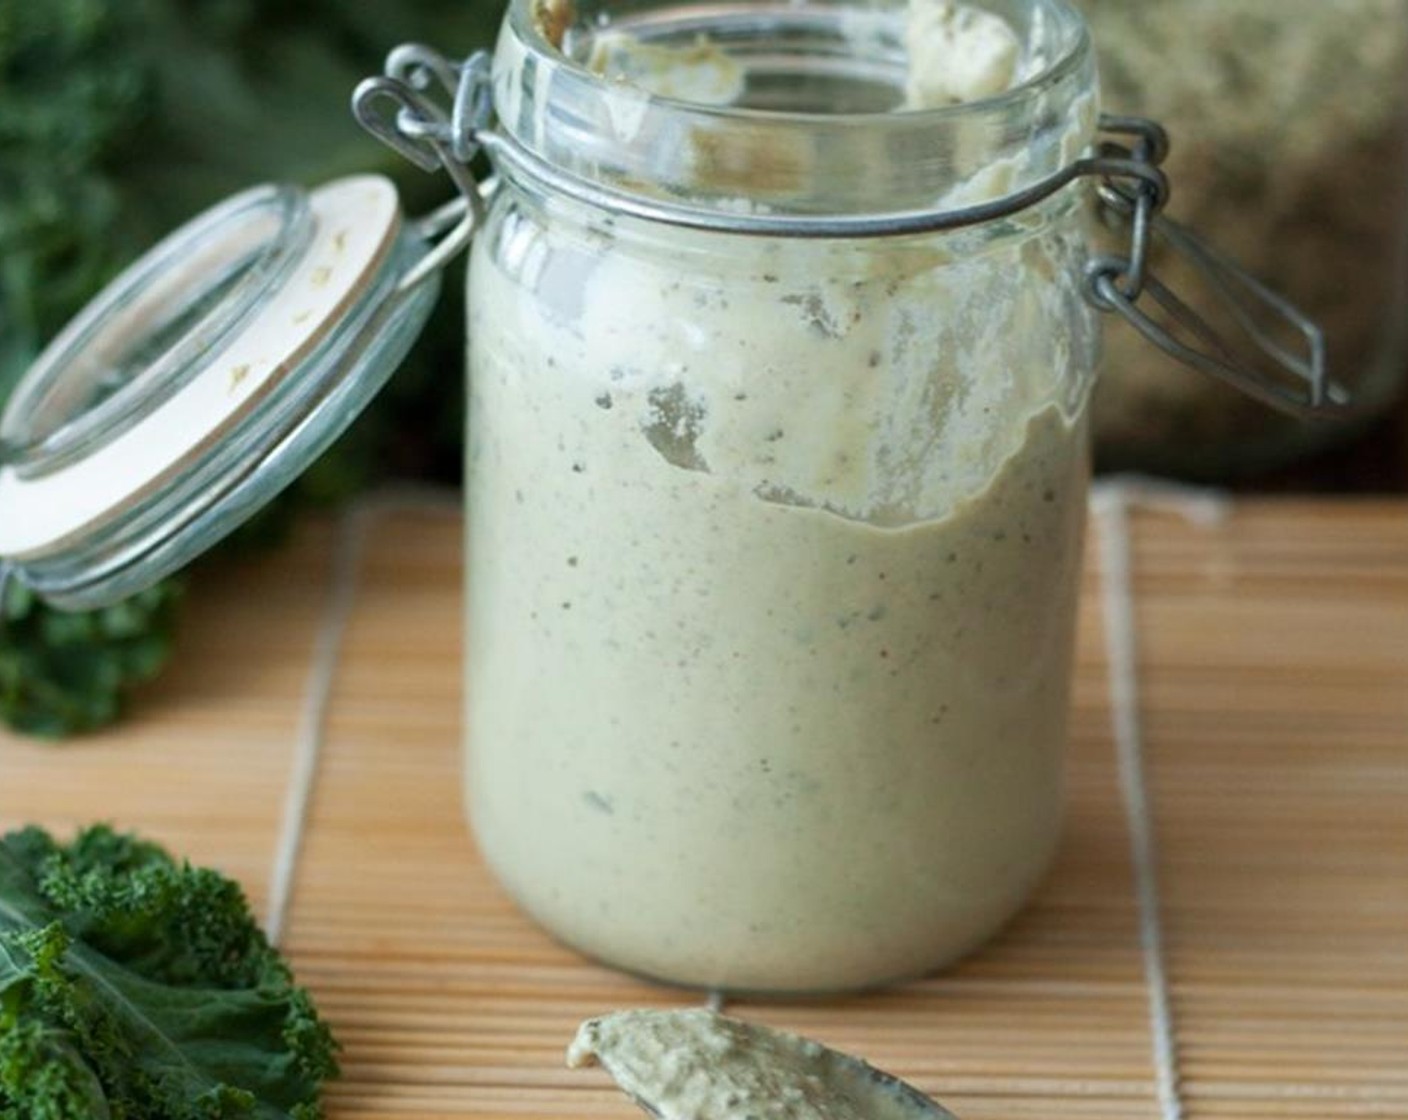 step 2 Once you have a well blended cashew cream, add water, Extra-Virgin Olive Oil (1 Tbsp), Nutritional Yeast (1 Tbsp), Lemon (1/2), Dijon Mustard (1 tsp), Capers (1 1/2 Tbsp), Garlic (1 clove), Tamari Soy Sauce (1 tsp), Kelp Granules (1 tsp), Salt (to taste), and Ground Black Pepper (to taste) to the blender. Blend until very well combined and smooth.